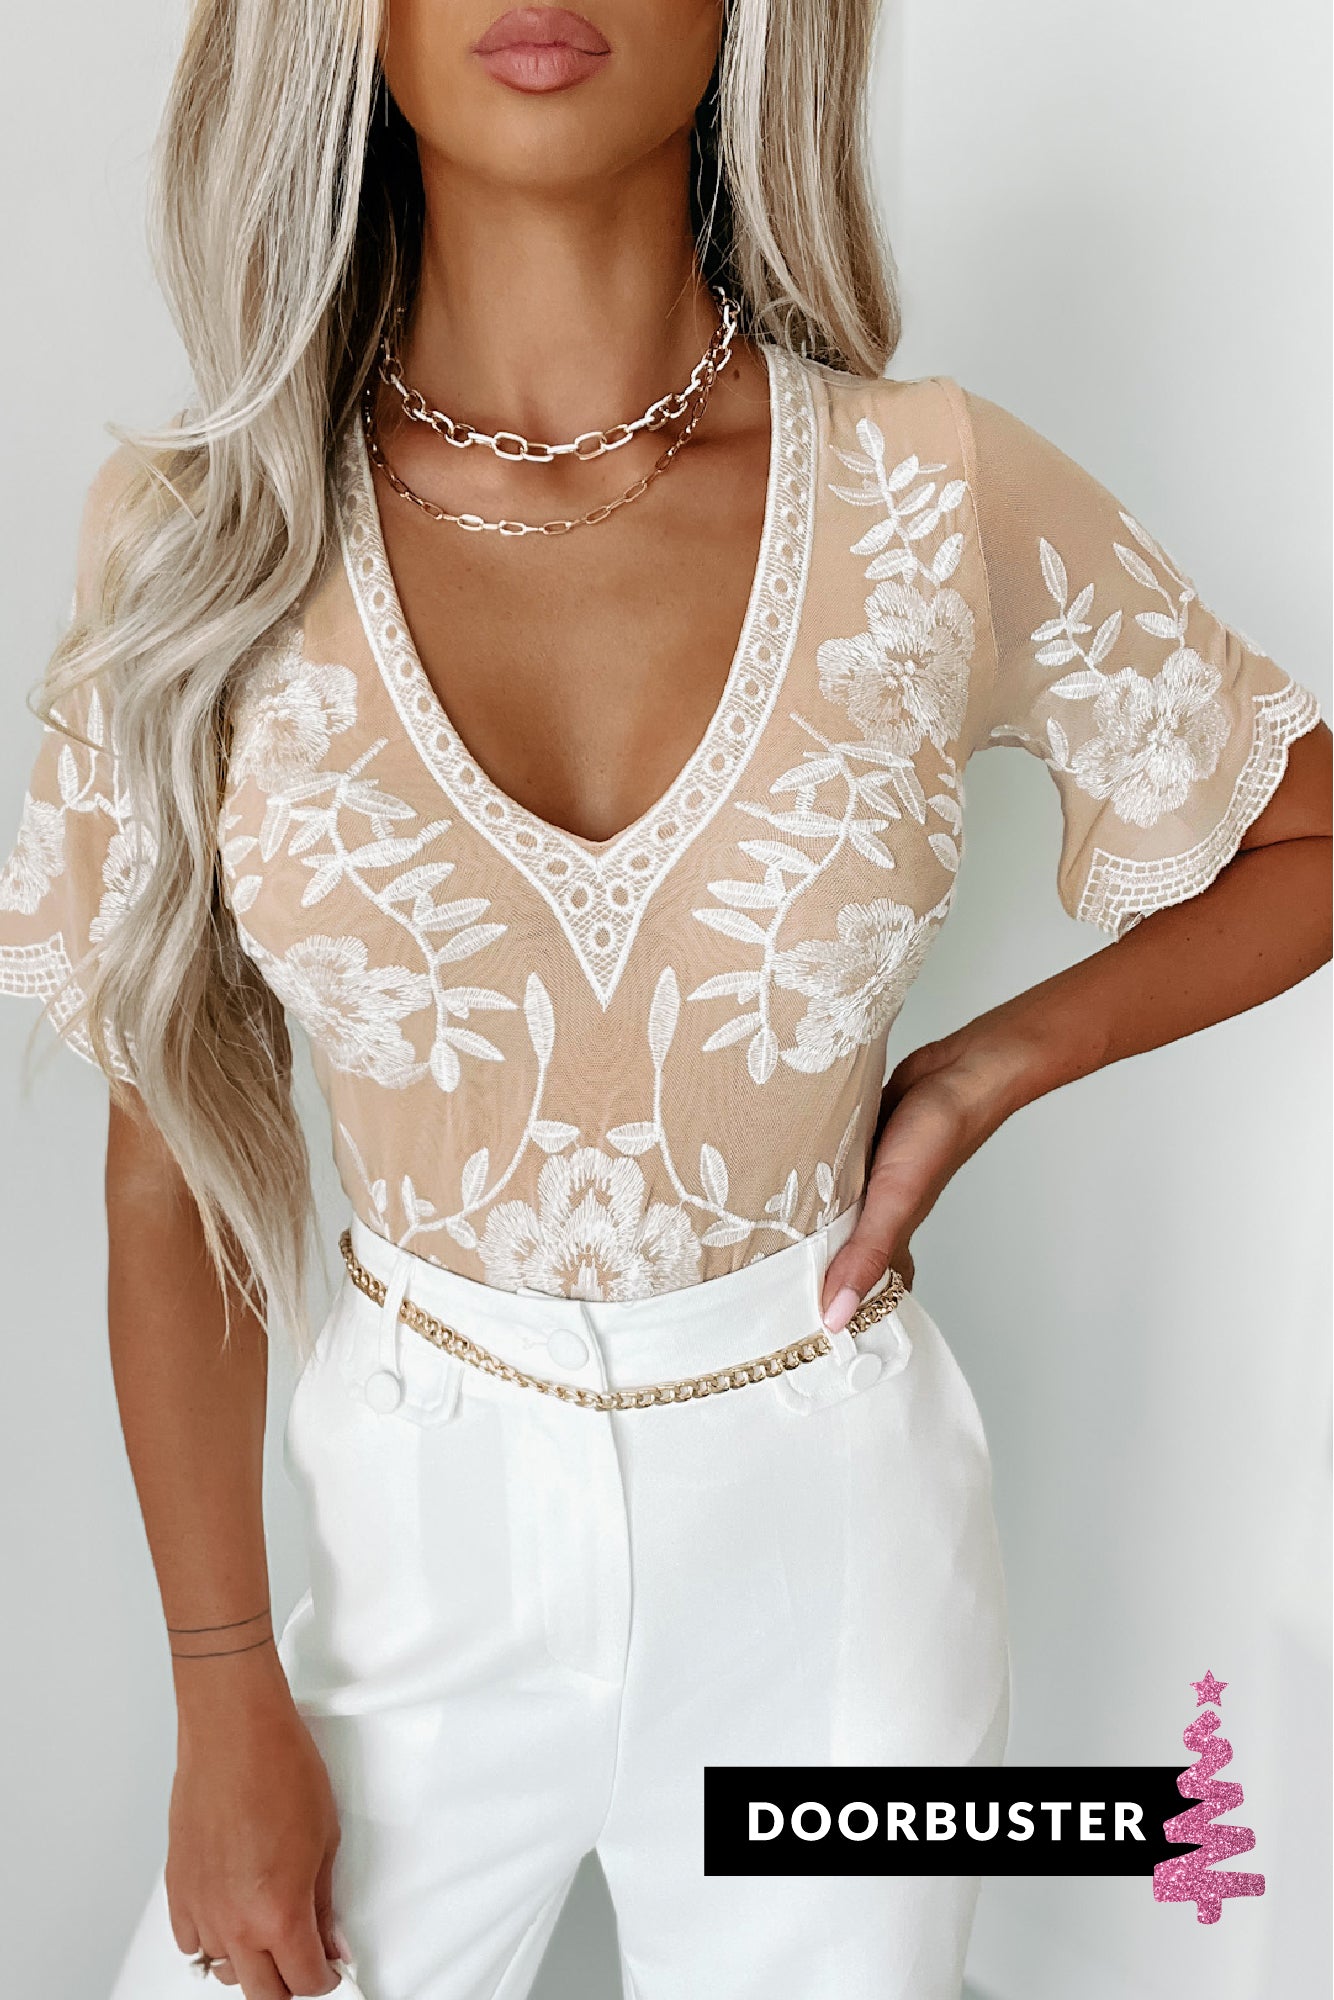 Follow Your Fancy Embroidered Bodysuit (Nude/White) · NanaMacs